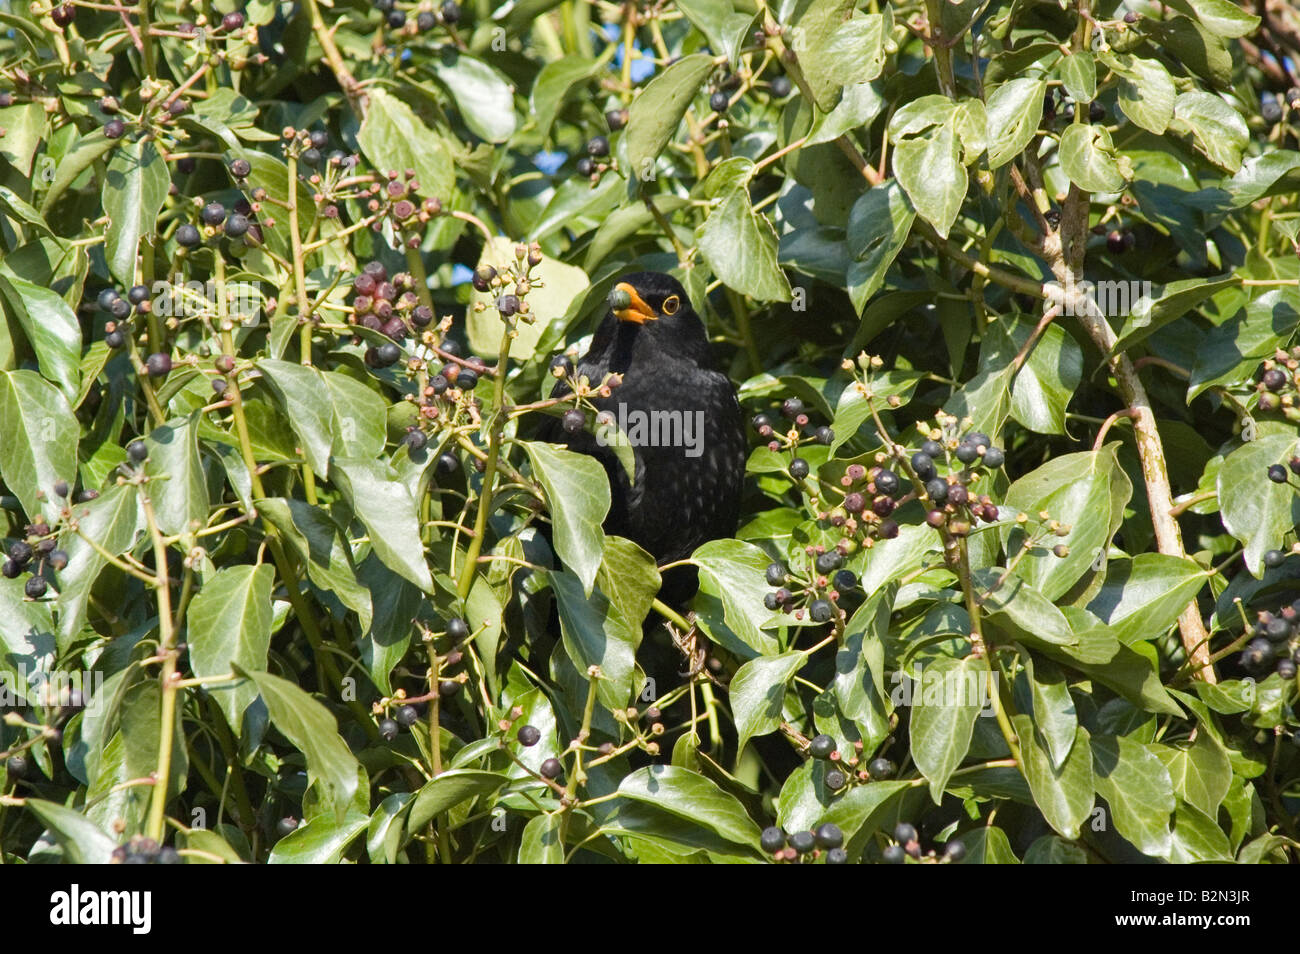 Blackbird in the middle of a glut of ivy berries. Stock Photo